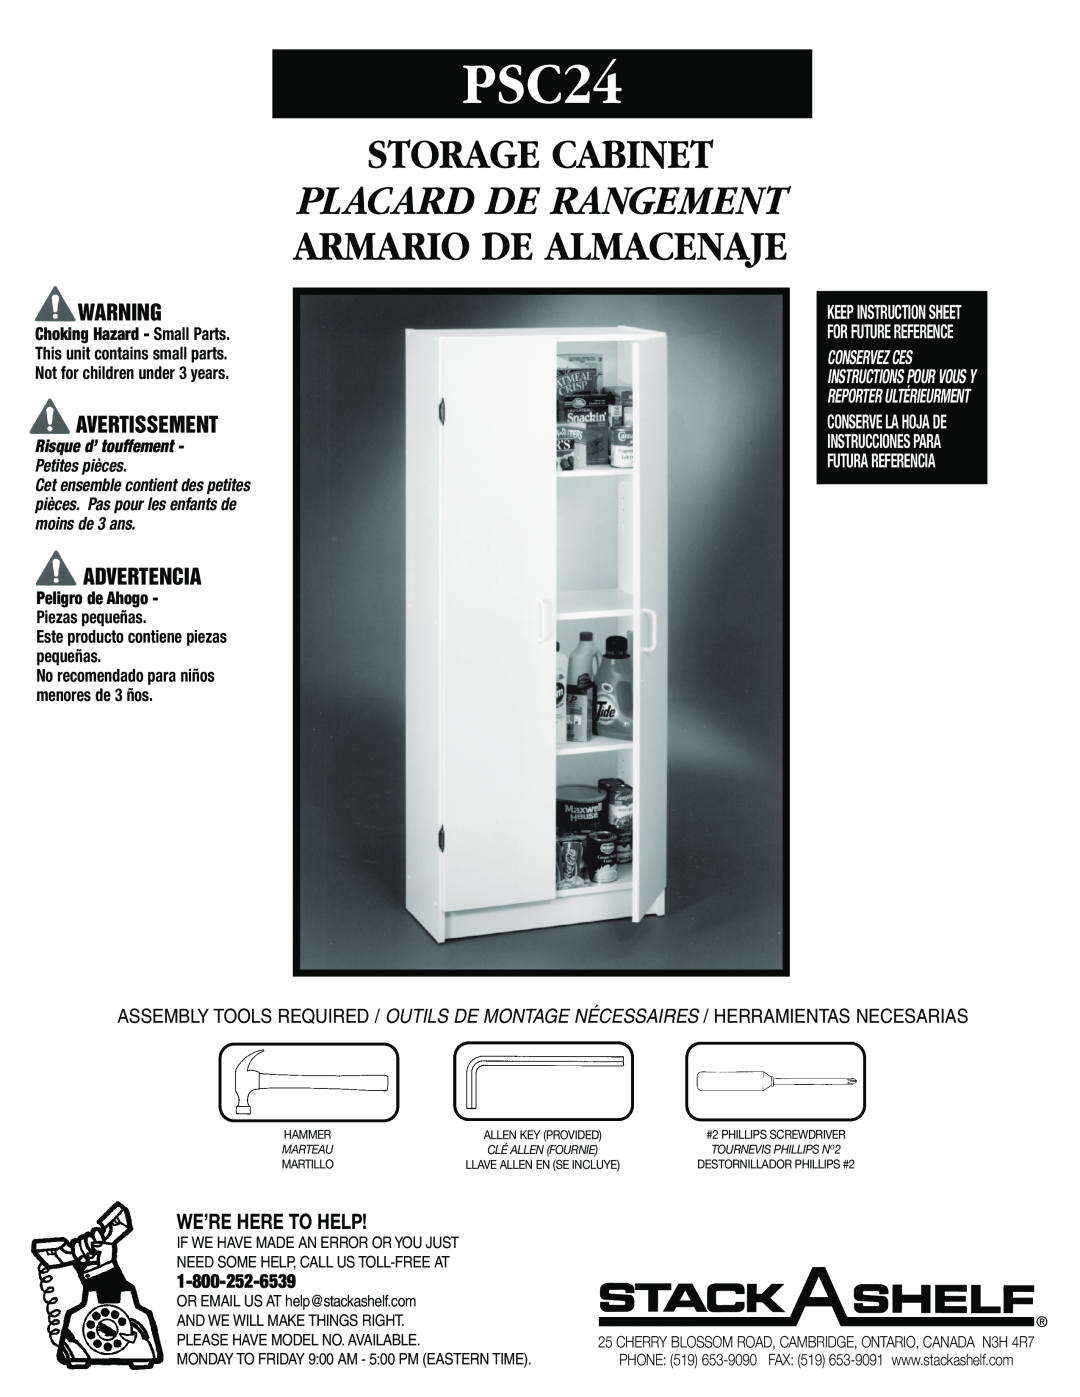 Closet Maid PSC24 instruction sheet Avertissement, Advertencia, We’Re Here To Help, And We Will Make Things Right 